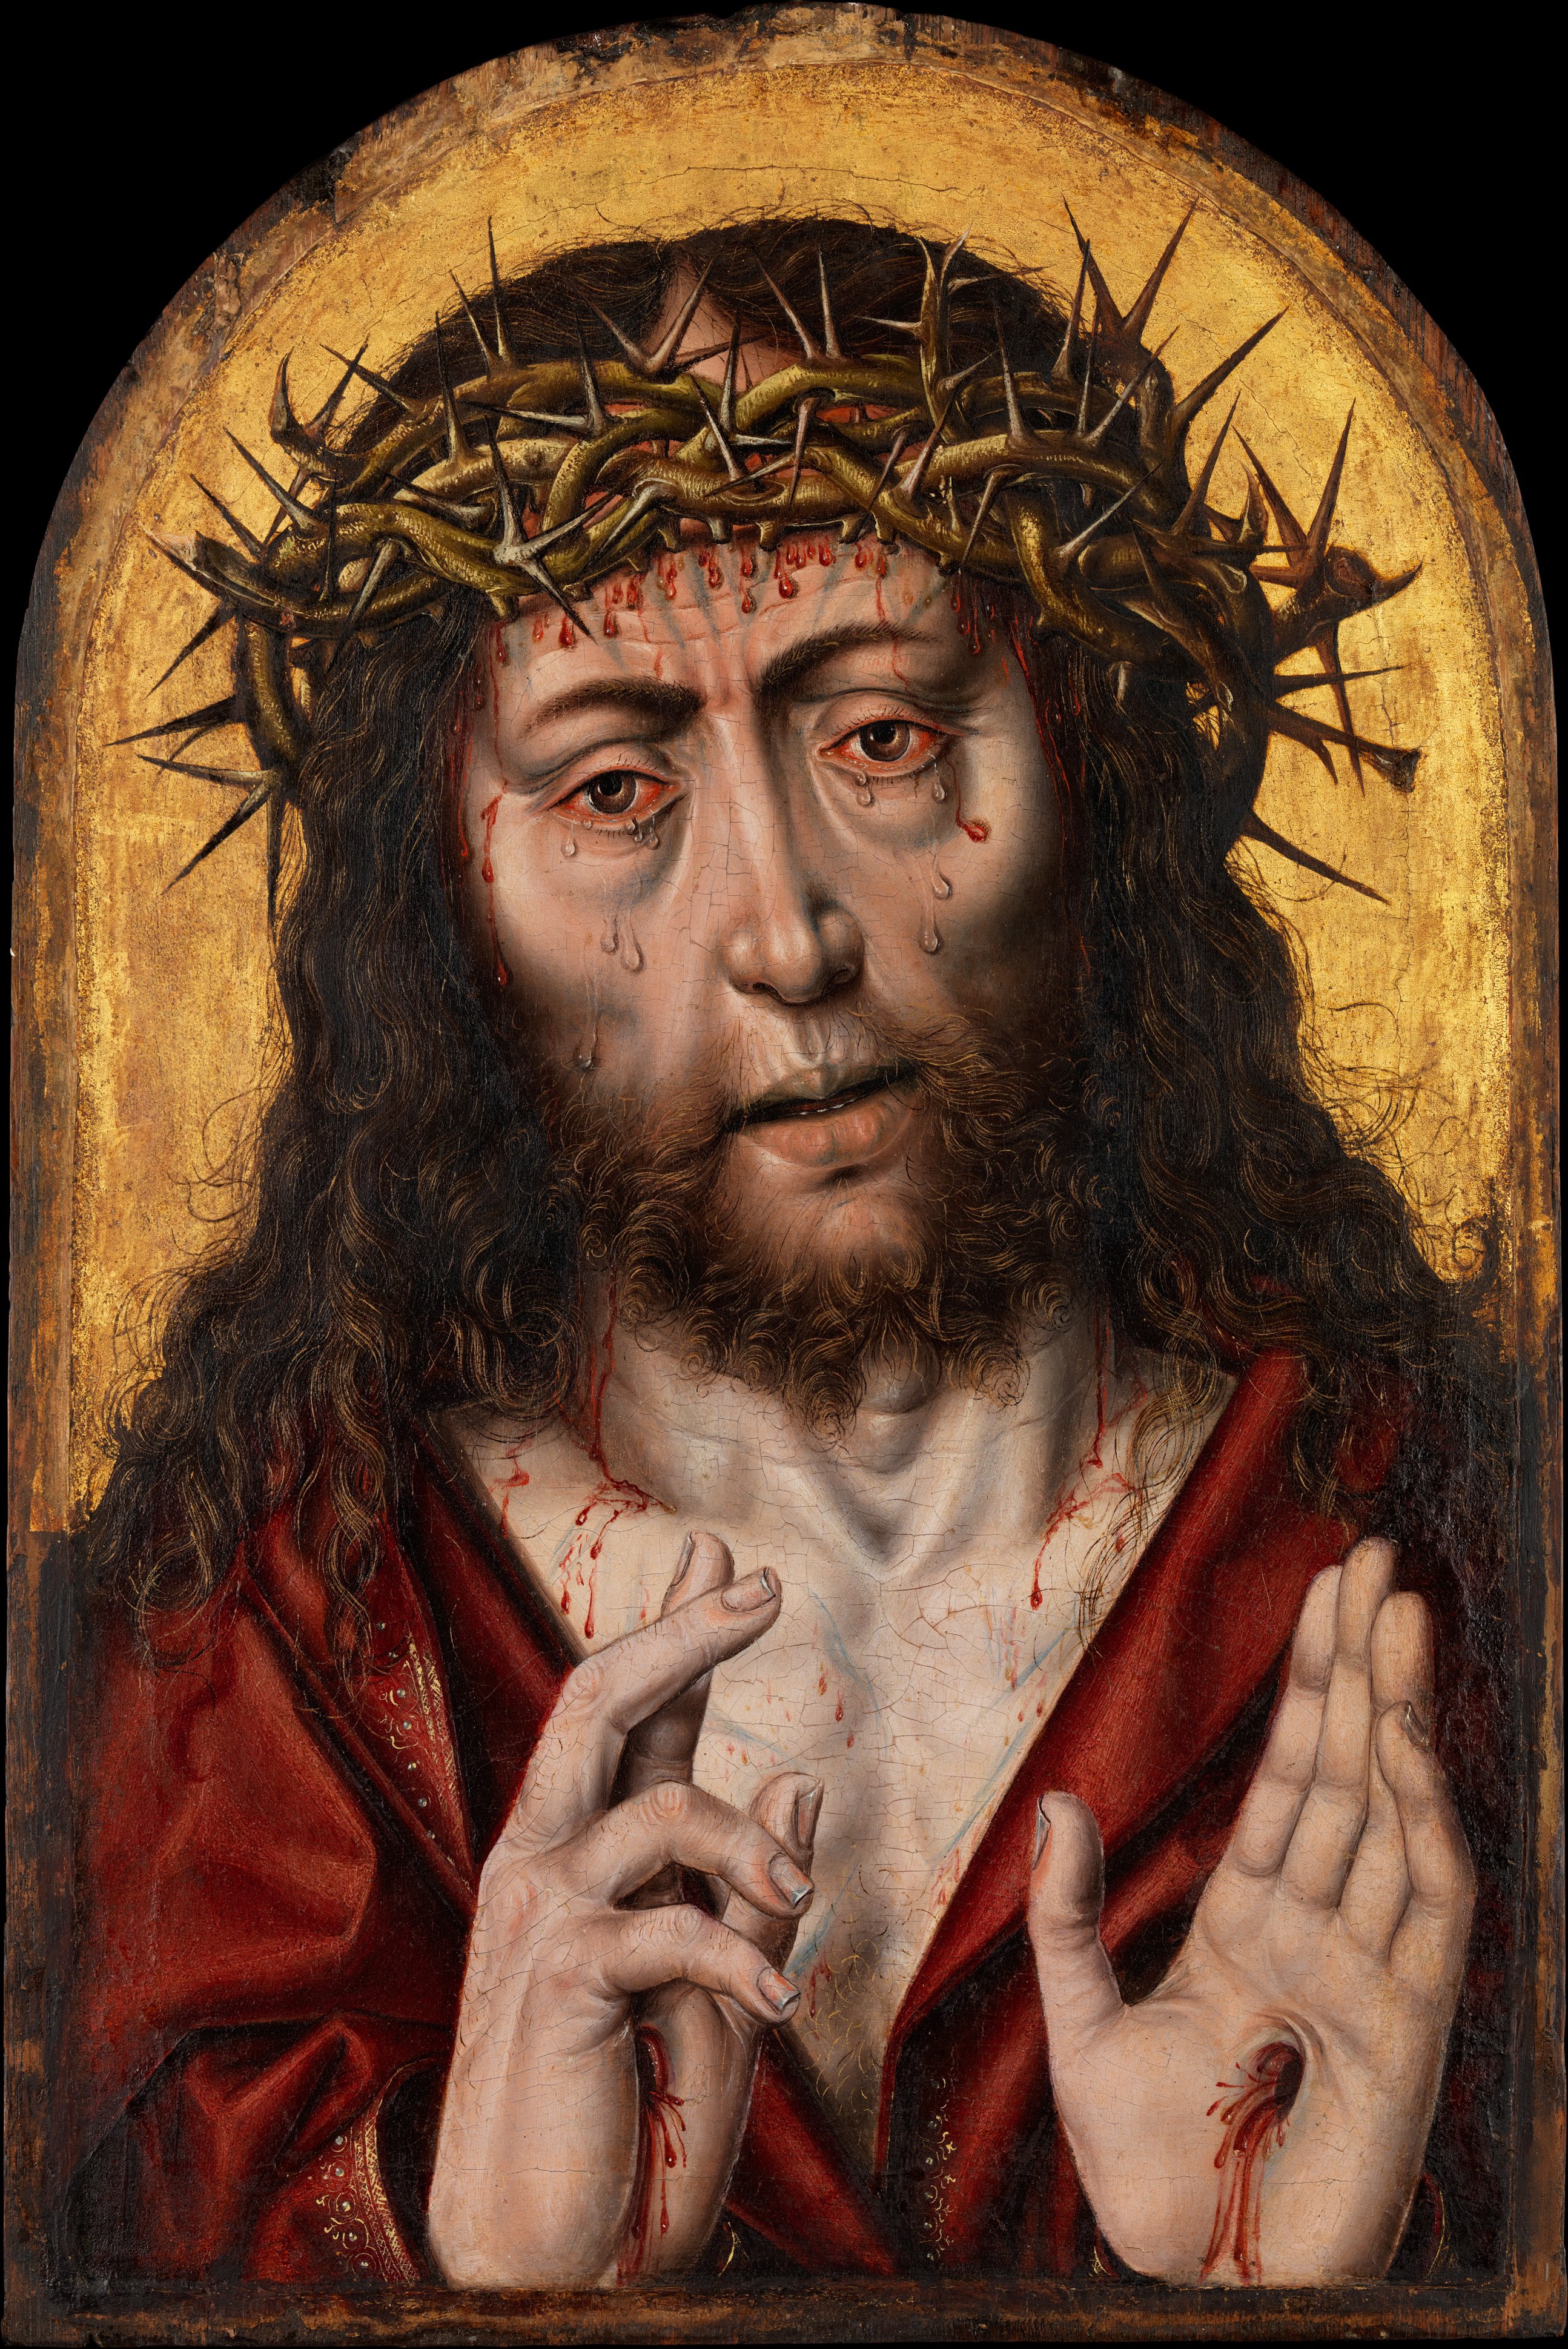 Aelbert Bouts (Netherlandish, Leuven ca. 1451/54–1549) The Man of Sorrows, ca. 1525 Oil on oak; Arched top, 17 1/2 x 11 1/4 in. (44.5 x 28.6 cm) The Metropolitan Museum of Art, New York, The Friedsam Collection, Bequest of Michael Friedsam, 1931 (32.100.55) http://www.metmuseum.org/Collections/search-the-collections/435760